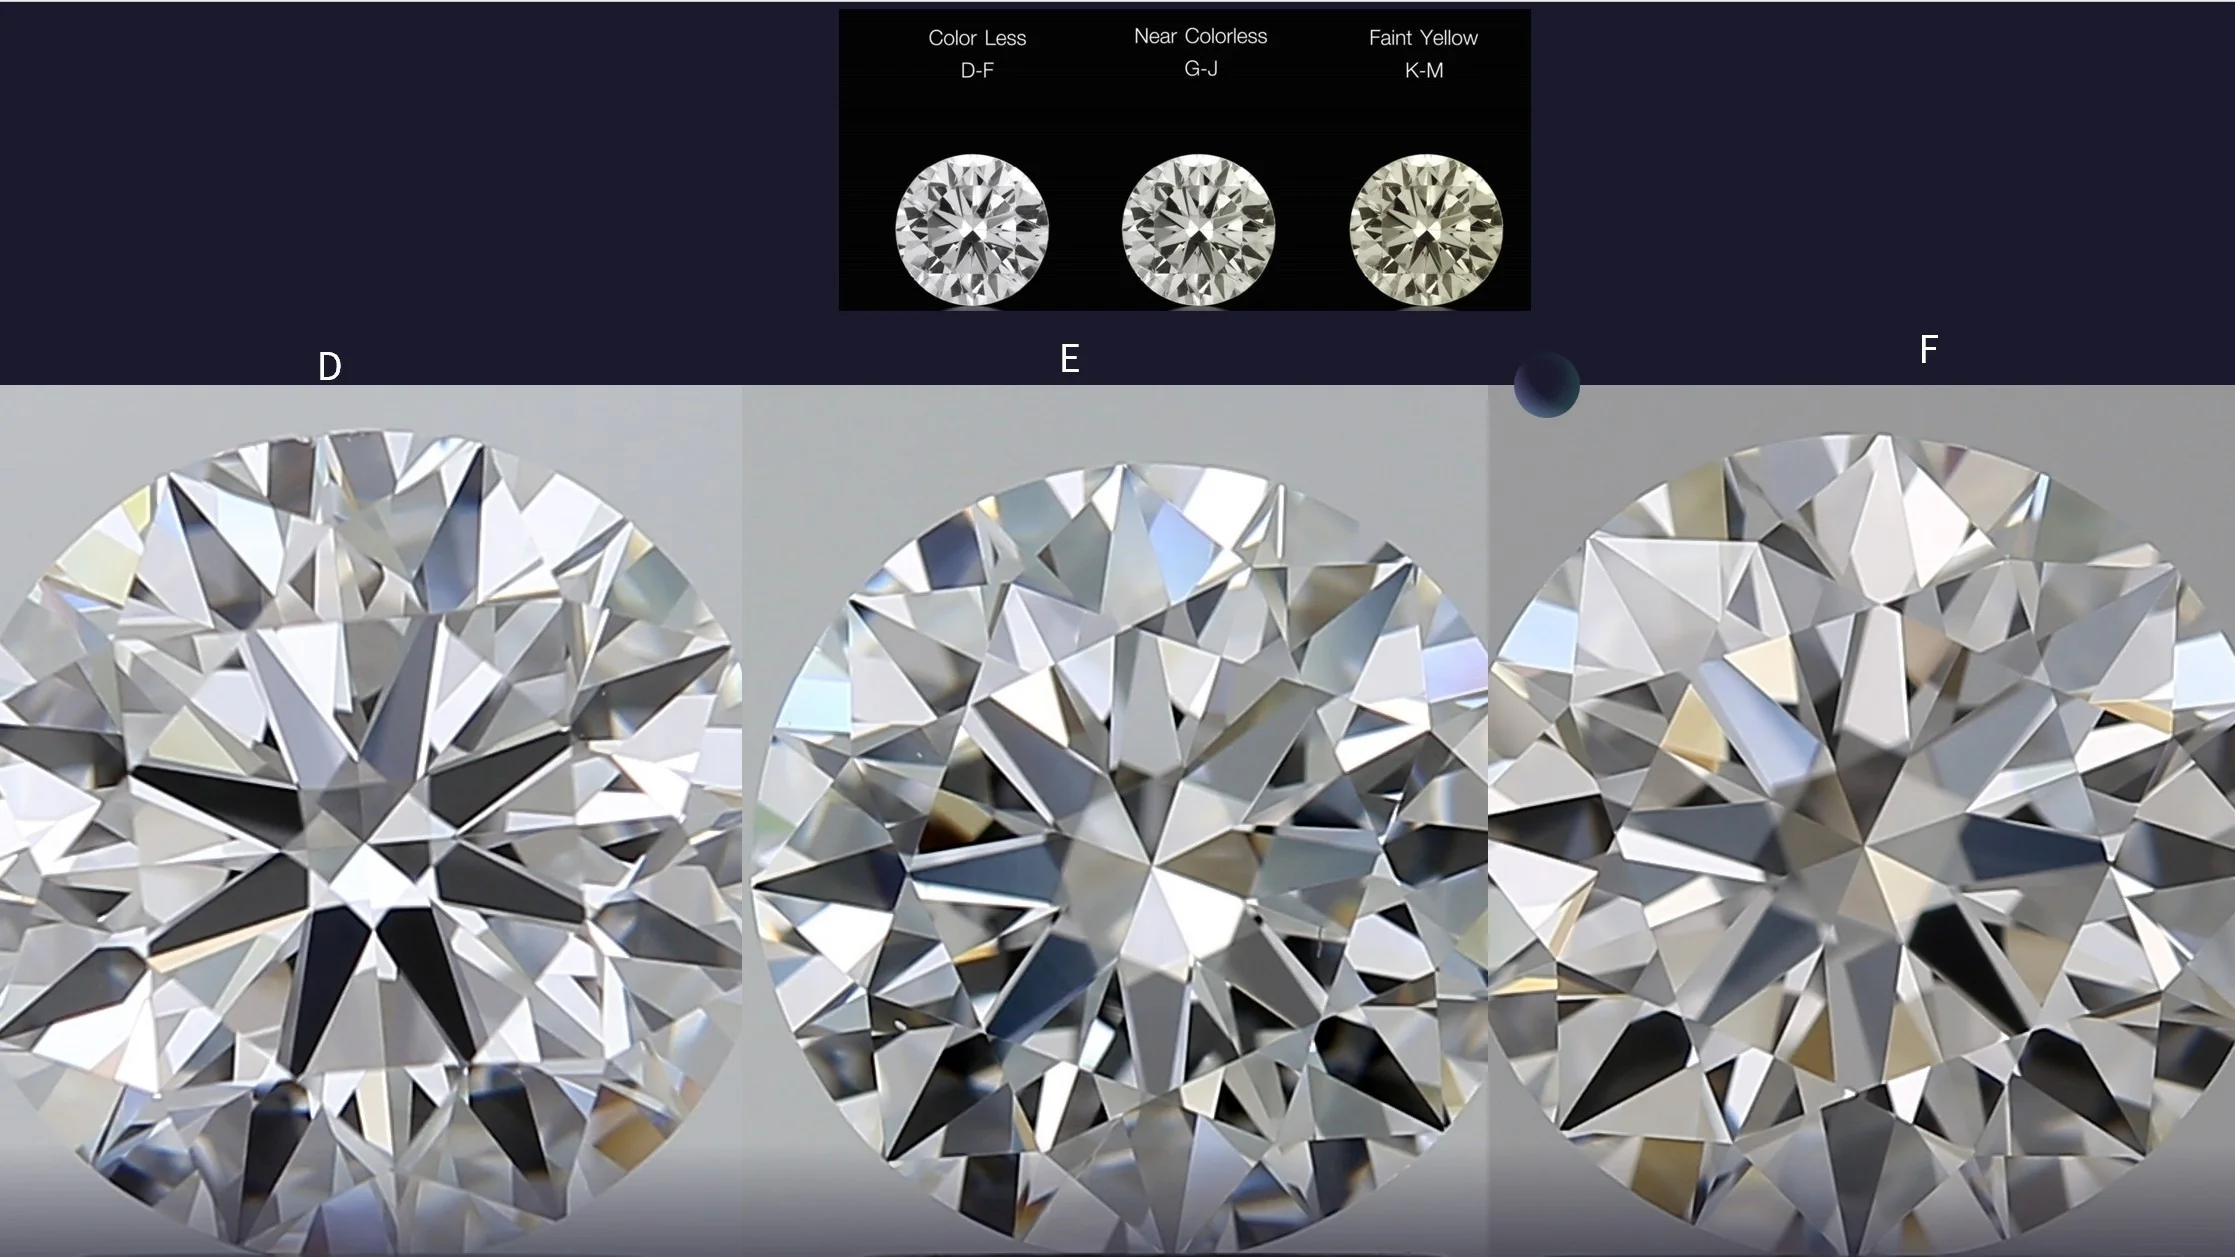 D, E, F Colorless Diamonds Differences